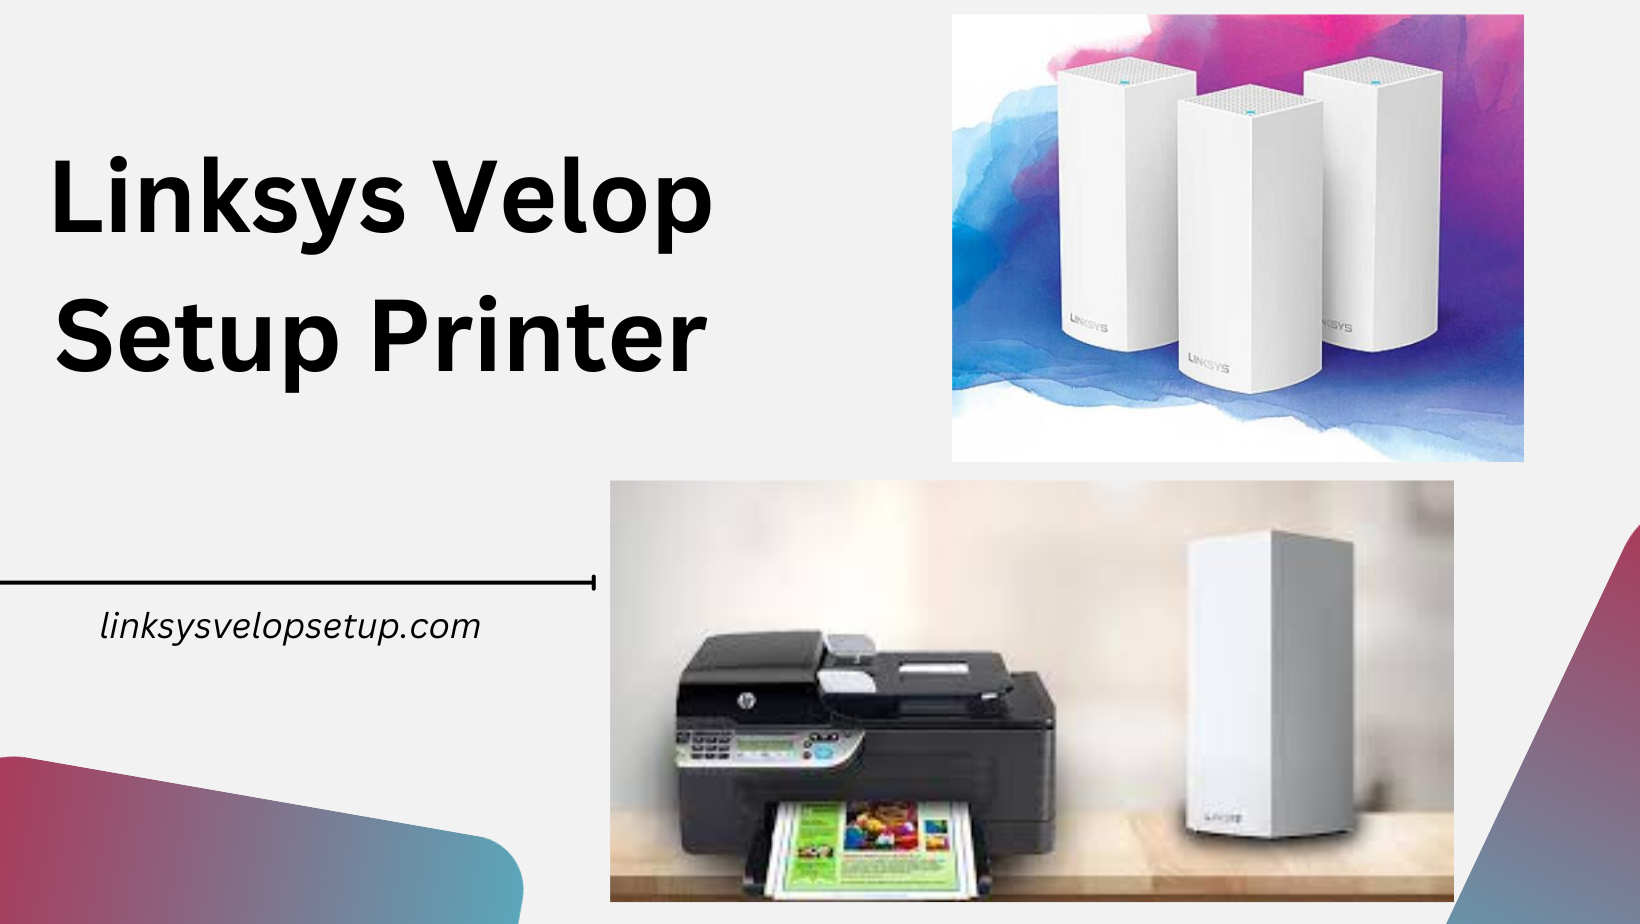 You are currently viewing Linksys Velop Setup Printer